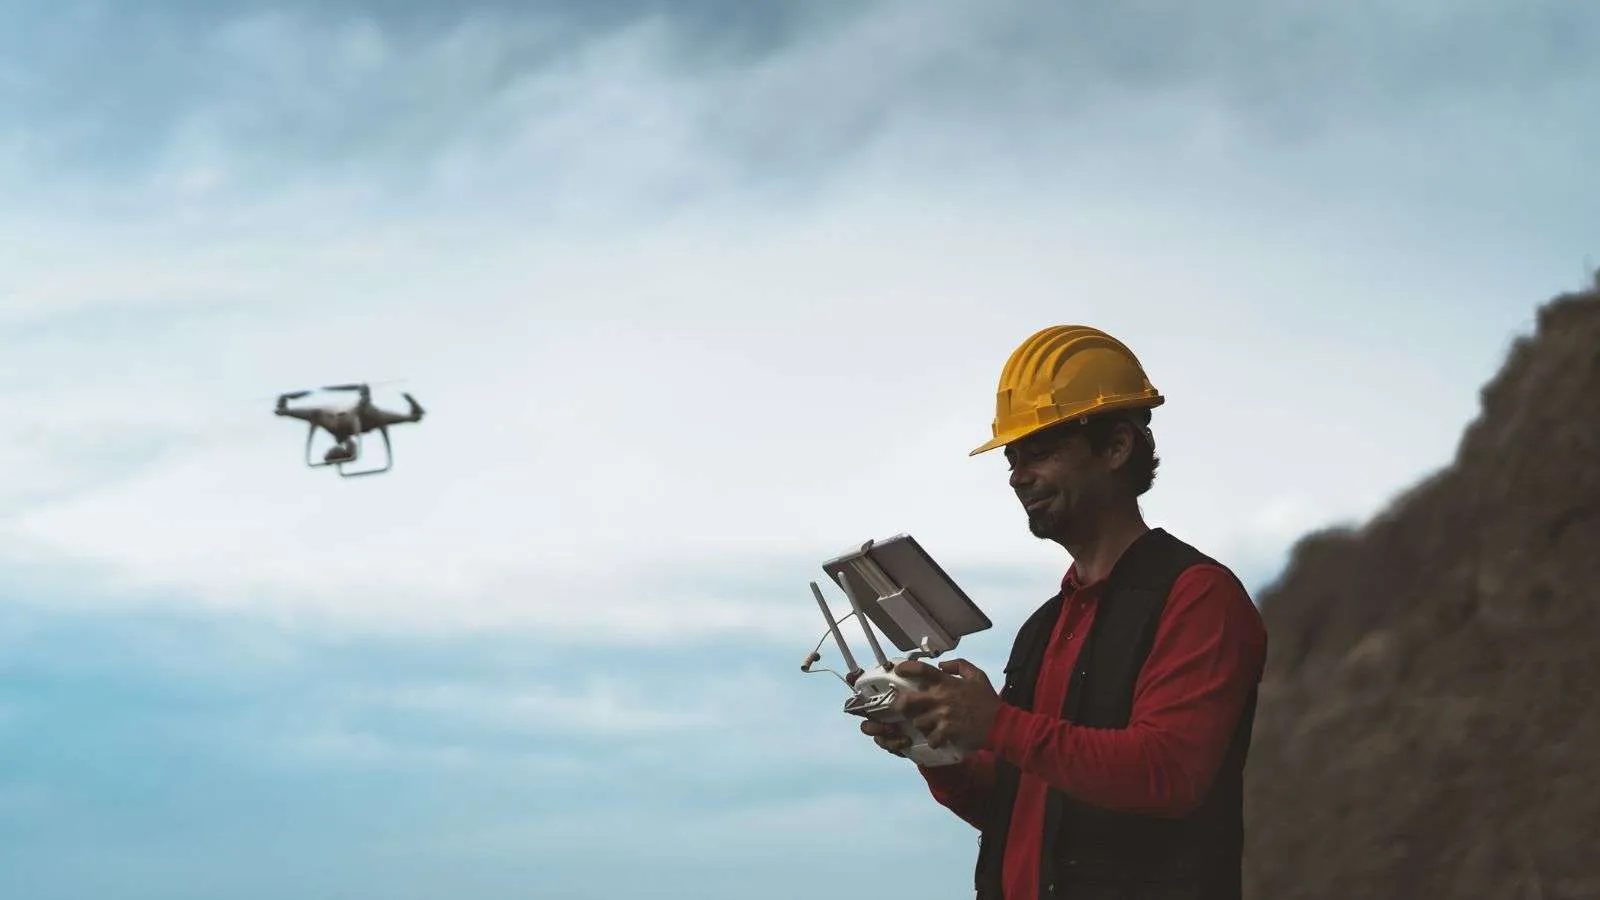 using drones safely effectively for roof surveys - bighomeproject.com